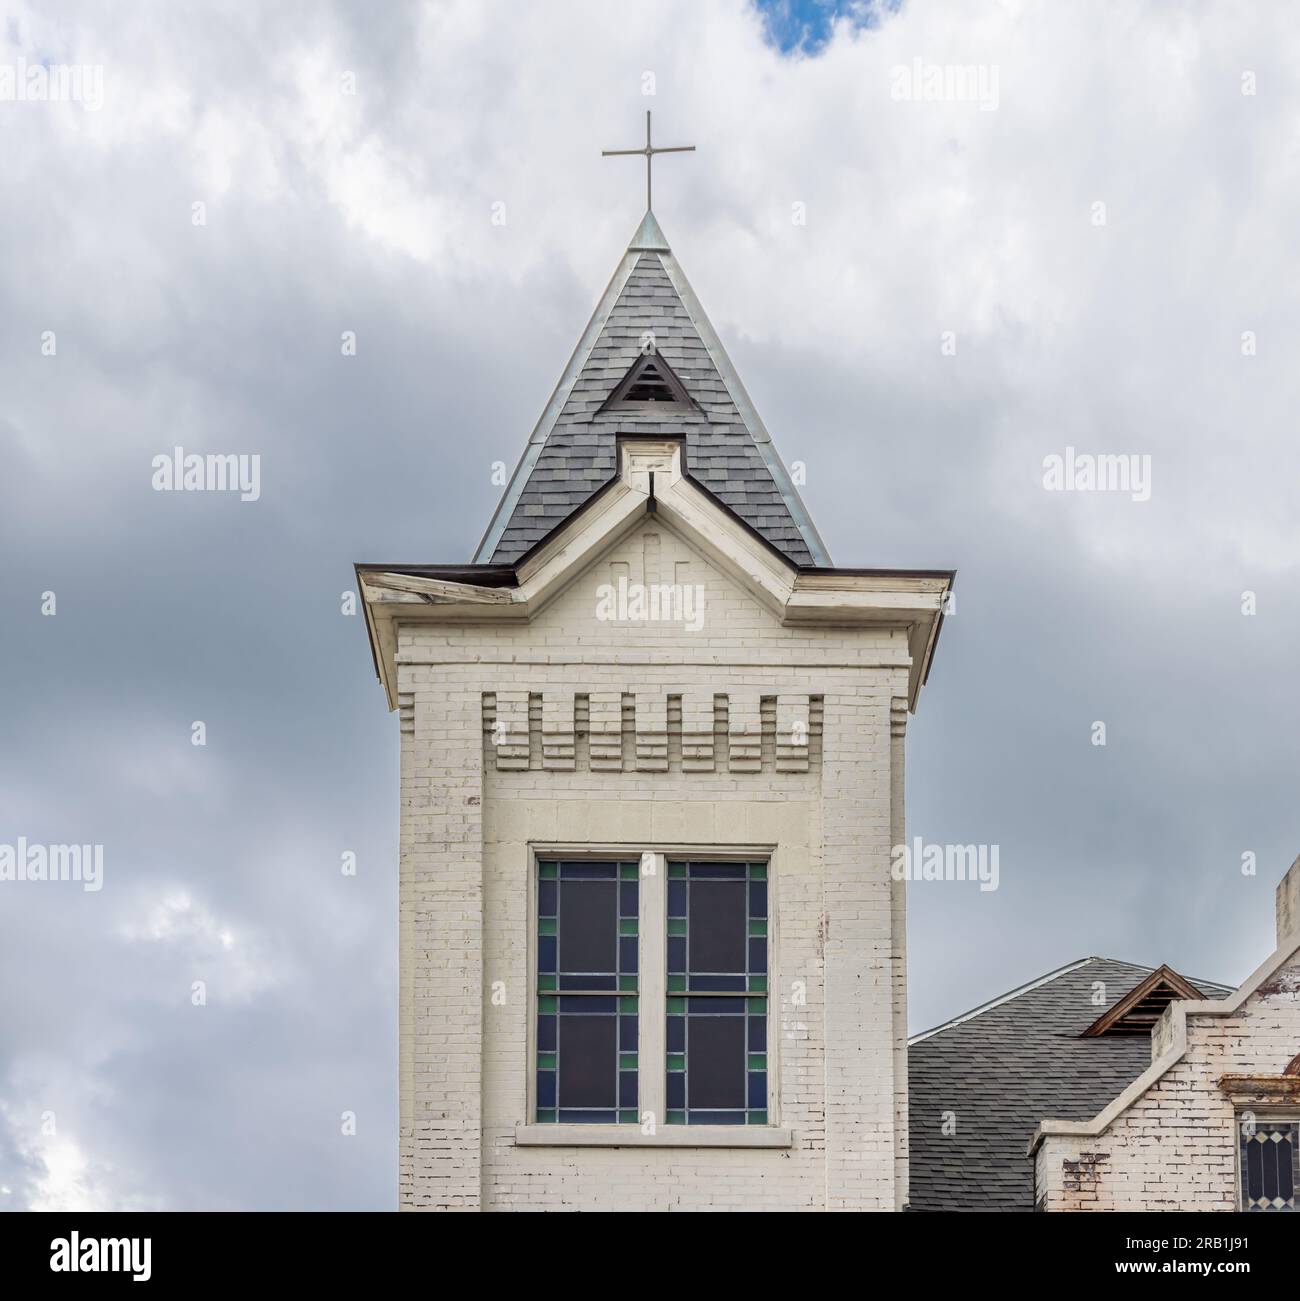 Detail image of the steeple at Midtown fellowship church in nashville, tennessee Stock Photo